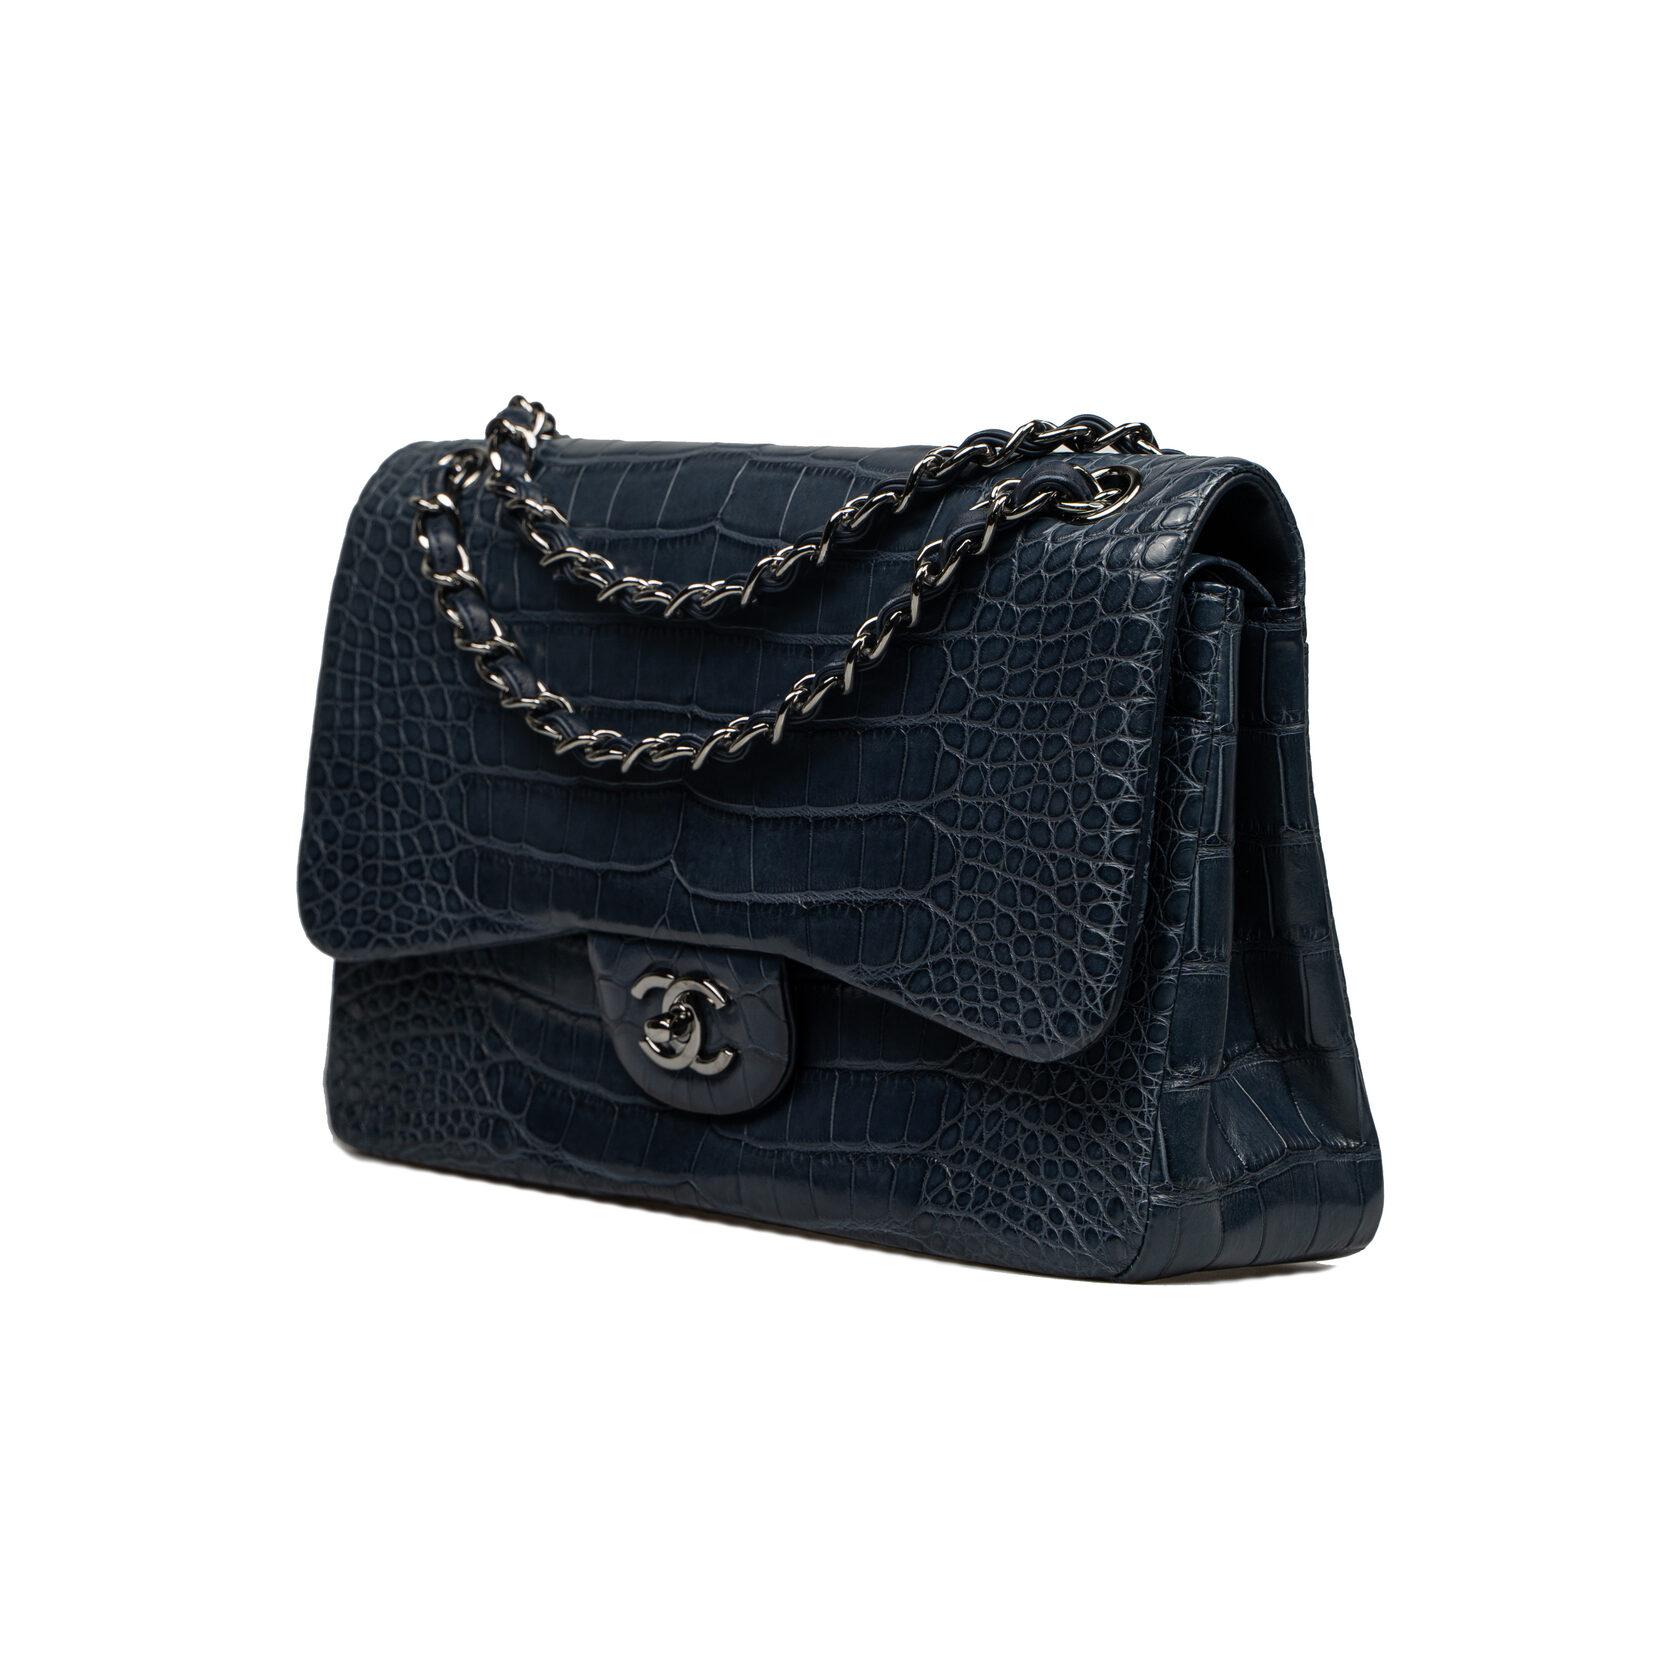 Chanel 11.12 Classic / Timeless Jumbo Double Flap Alligator For Sale 10